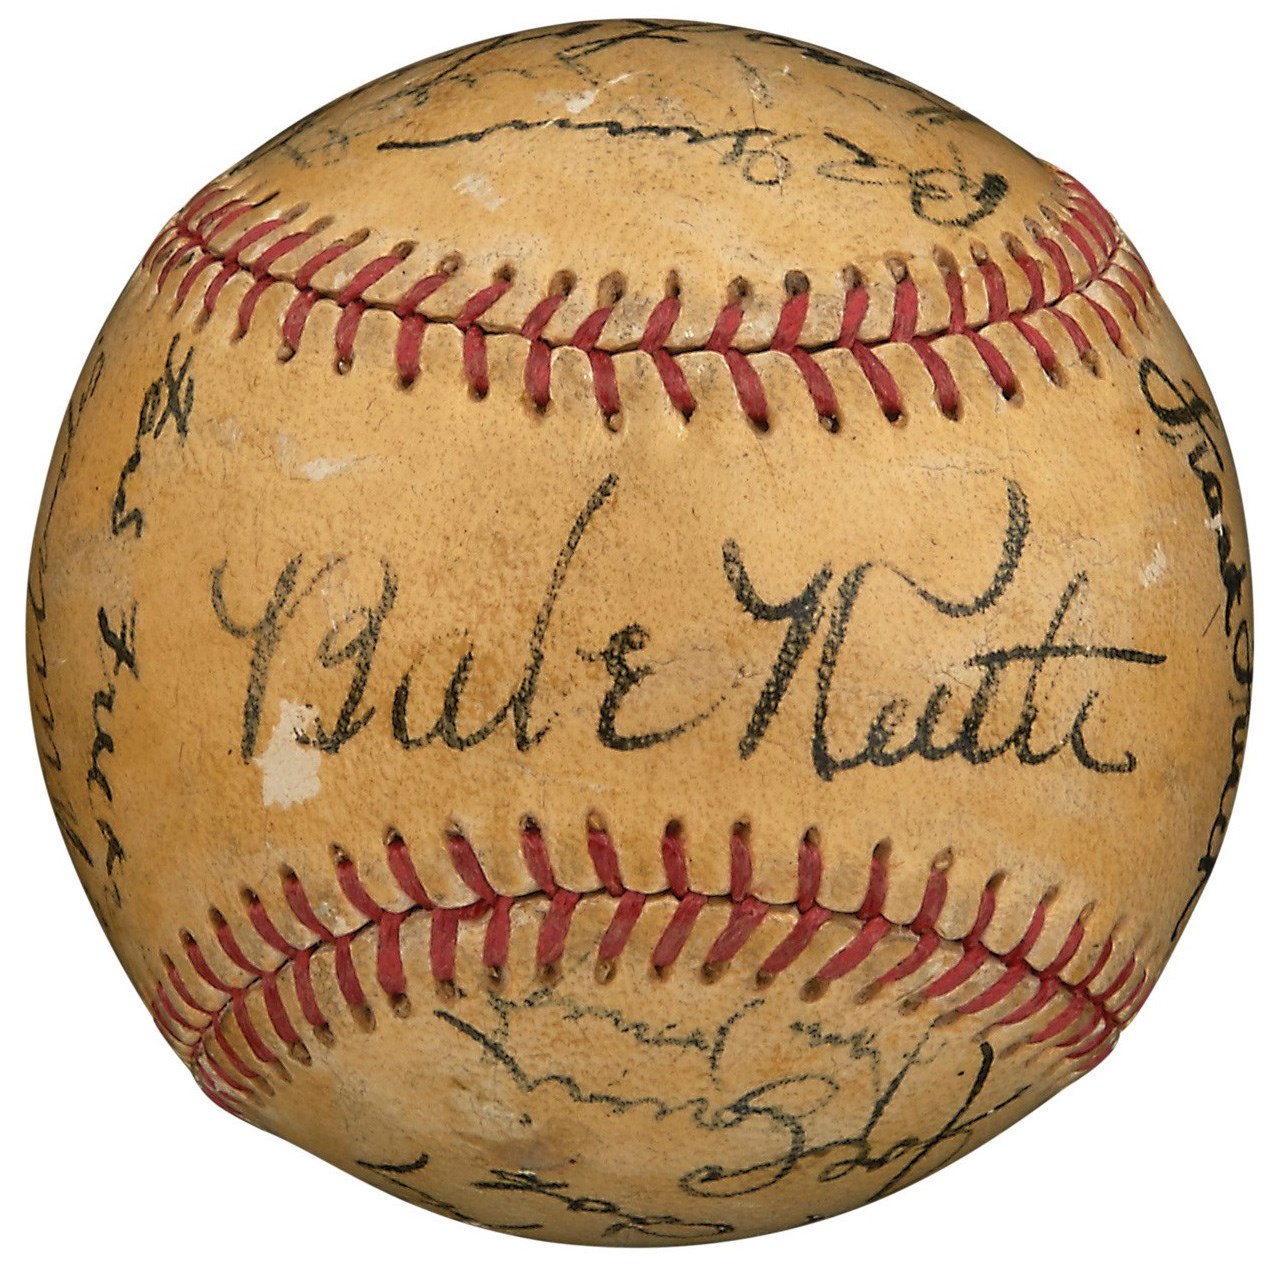 1938 Babe Ruth and Hall of Famers Signed Baseball at NYC Press Club Dinner (PSA & JSA)